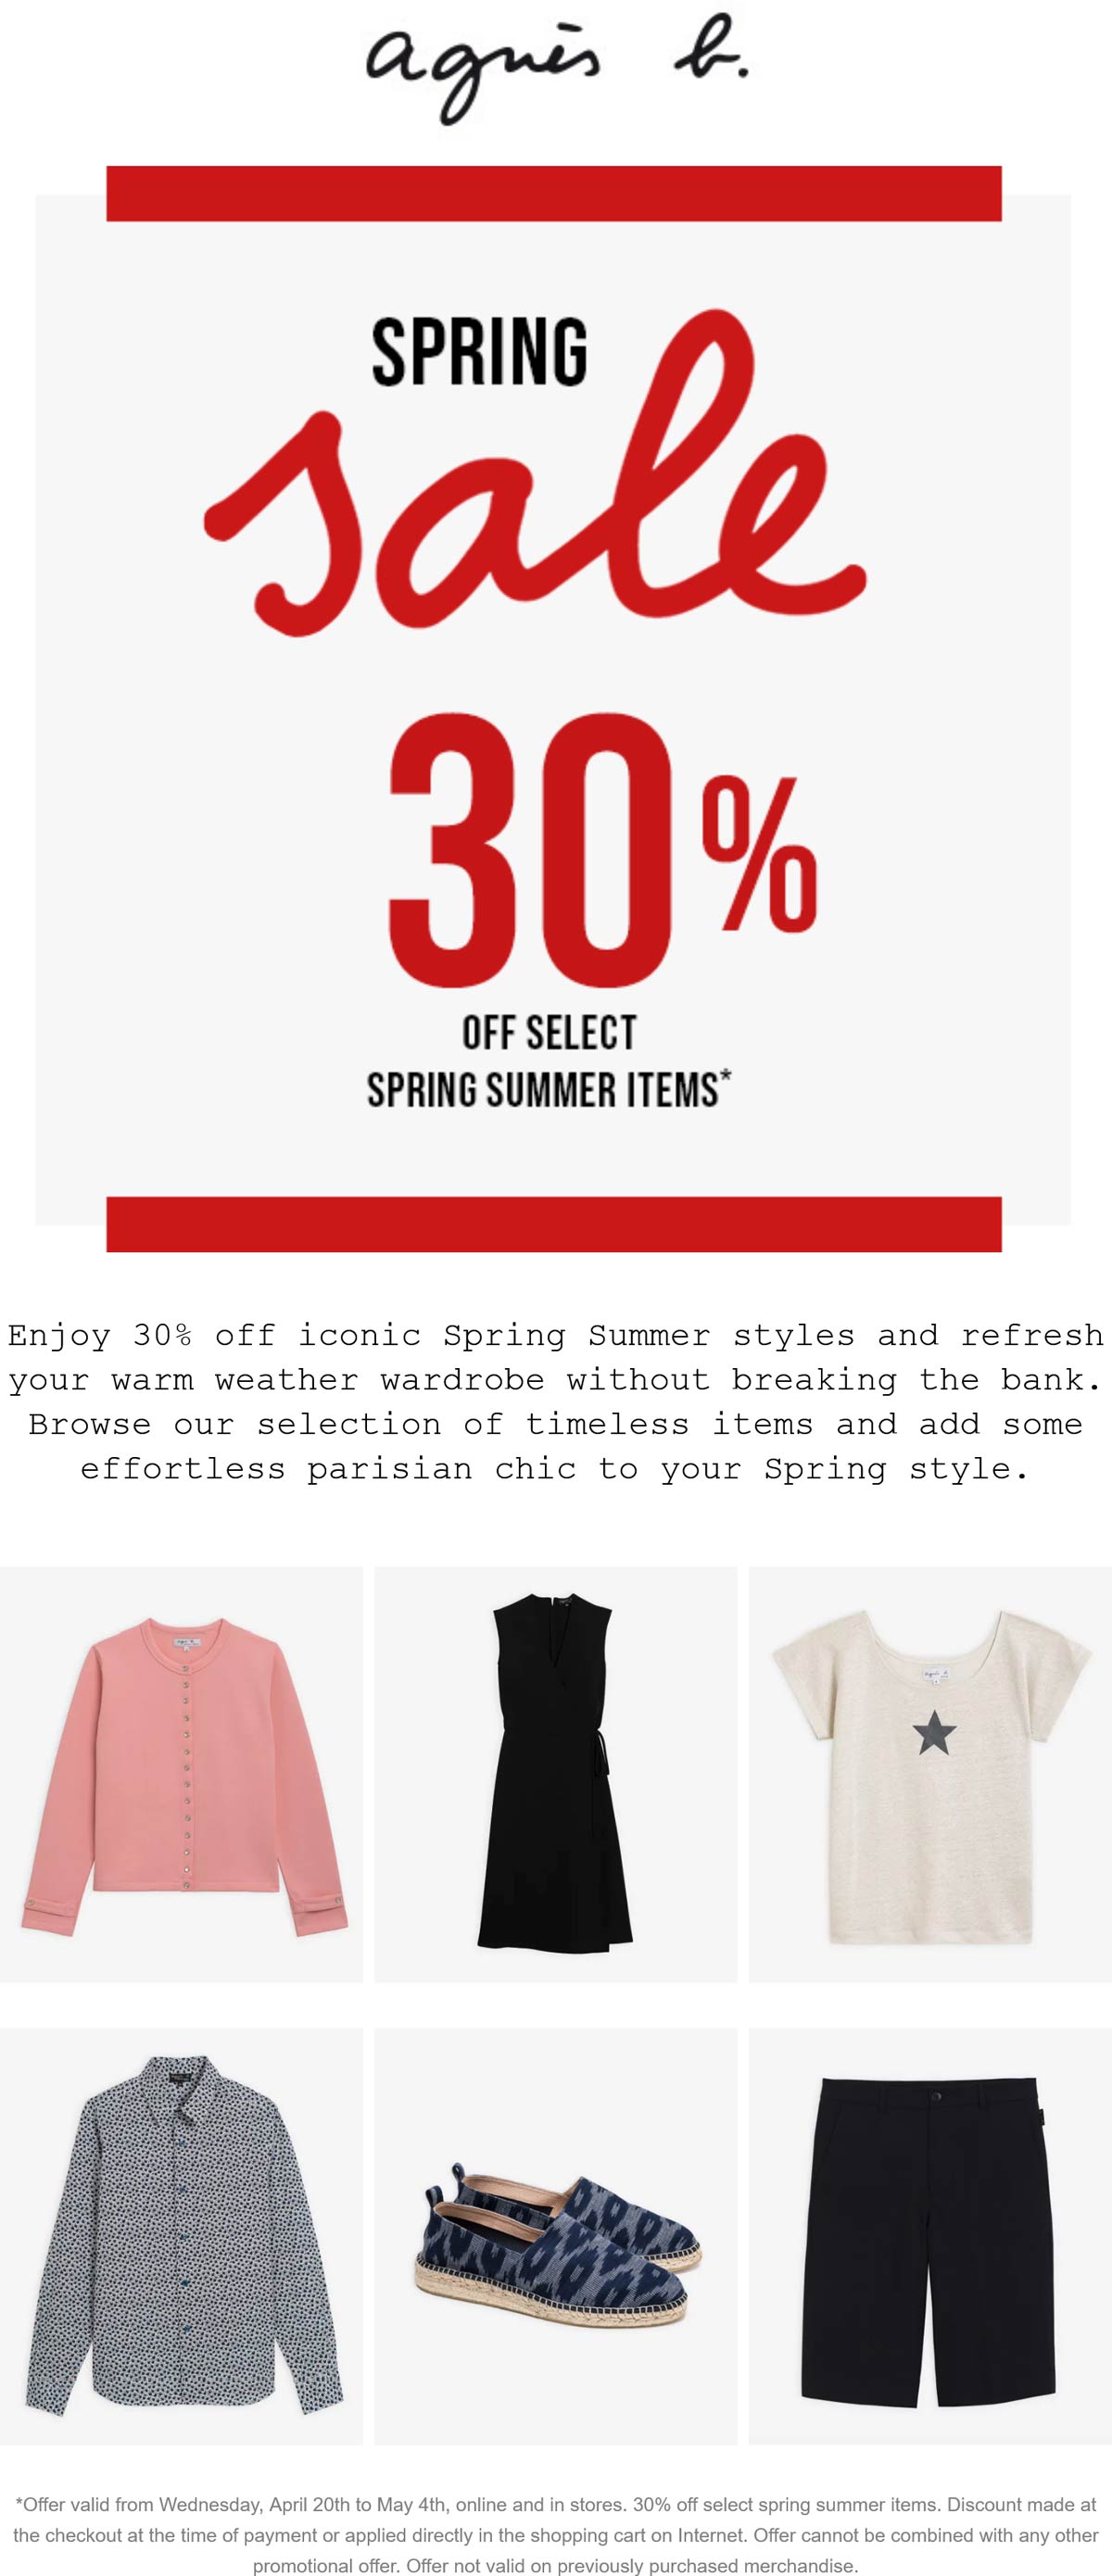 agnes b. stores Coupon  30% off spring summer items at agnes b., ditto online #agnesb 